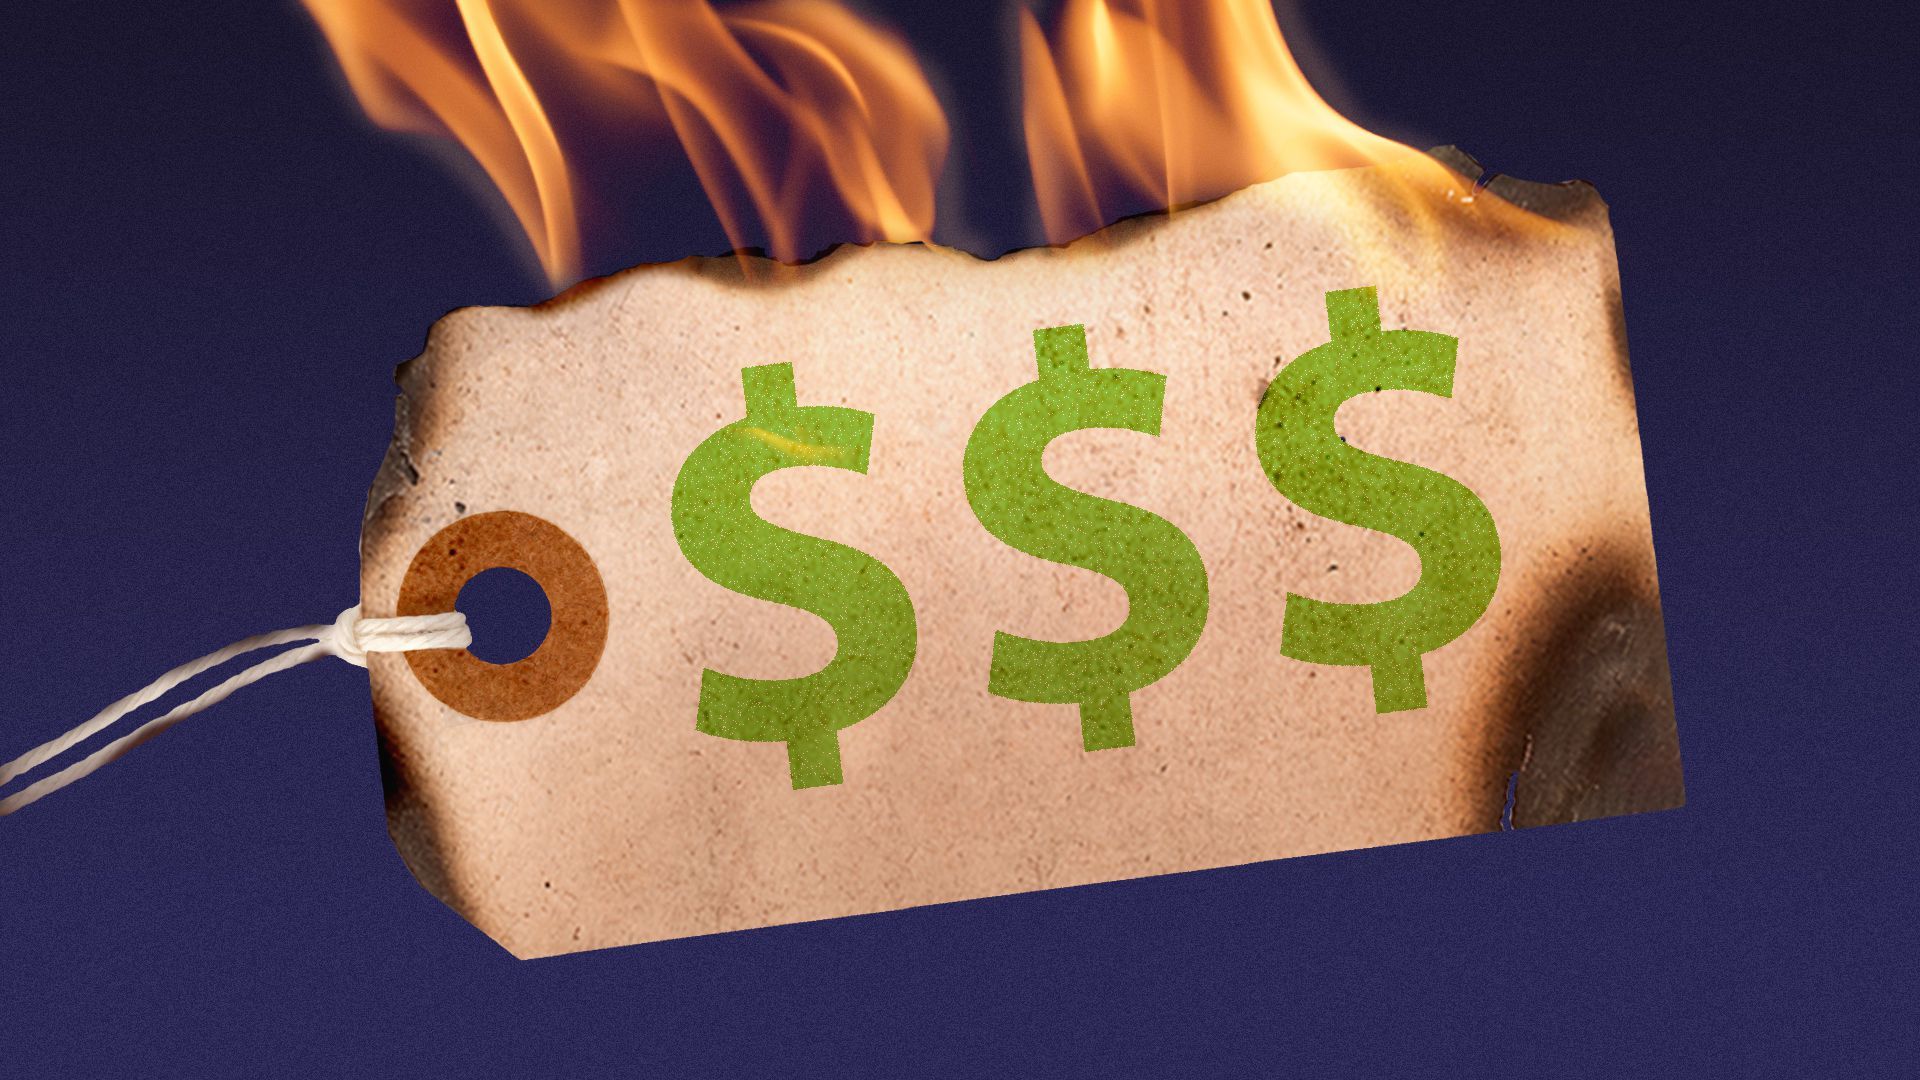 Illustration of a price tag on fire.